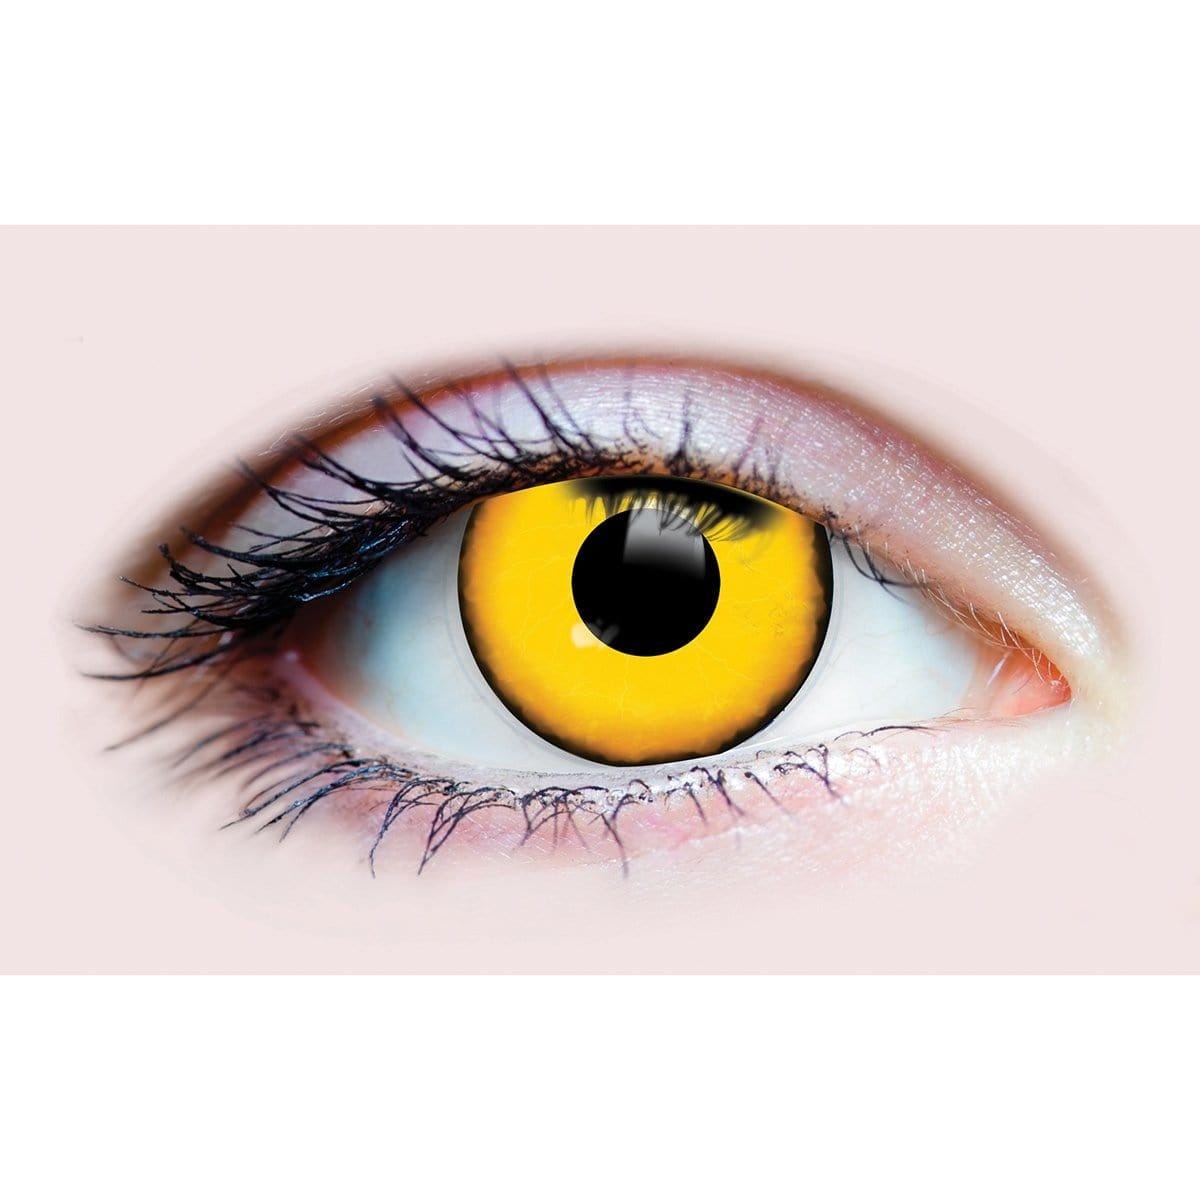 Buy Costume Accessories Villain contact lenses, 3 months usage sold at Party Expert